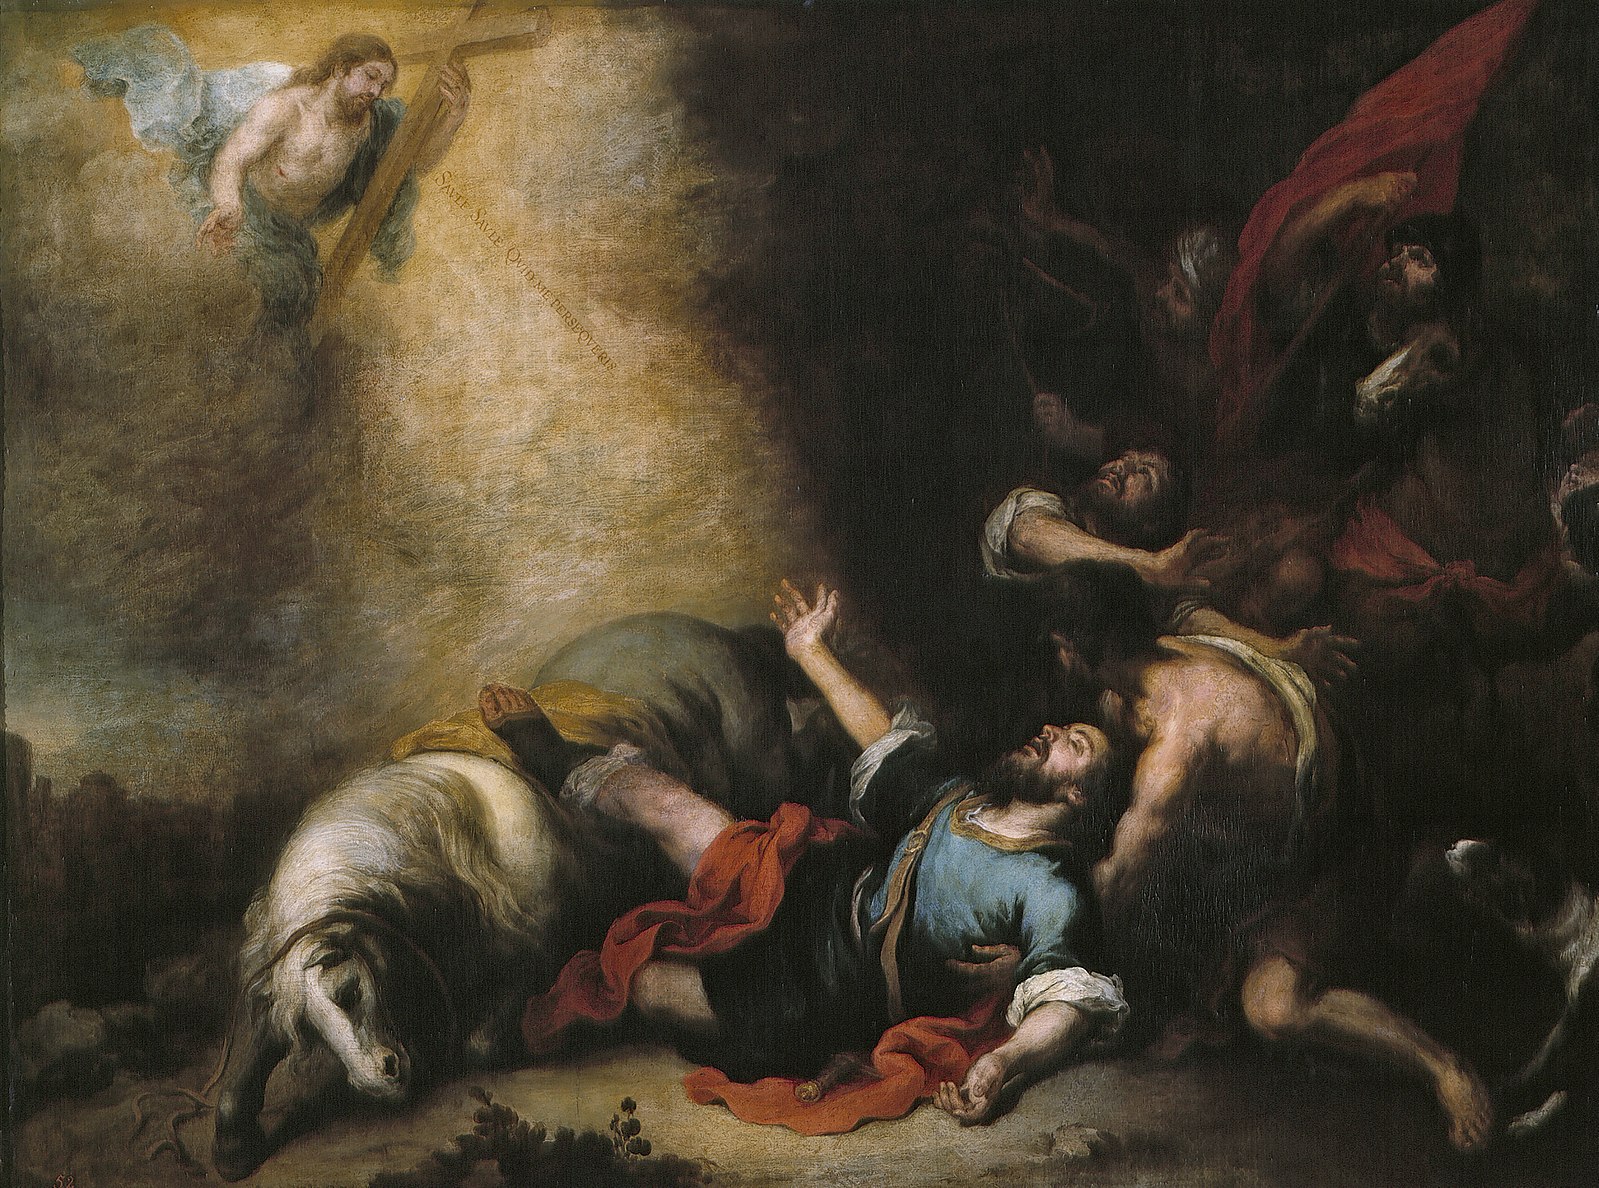 A painting of St. Paul collapsing because Jesus has appeared to him in the sky